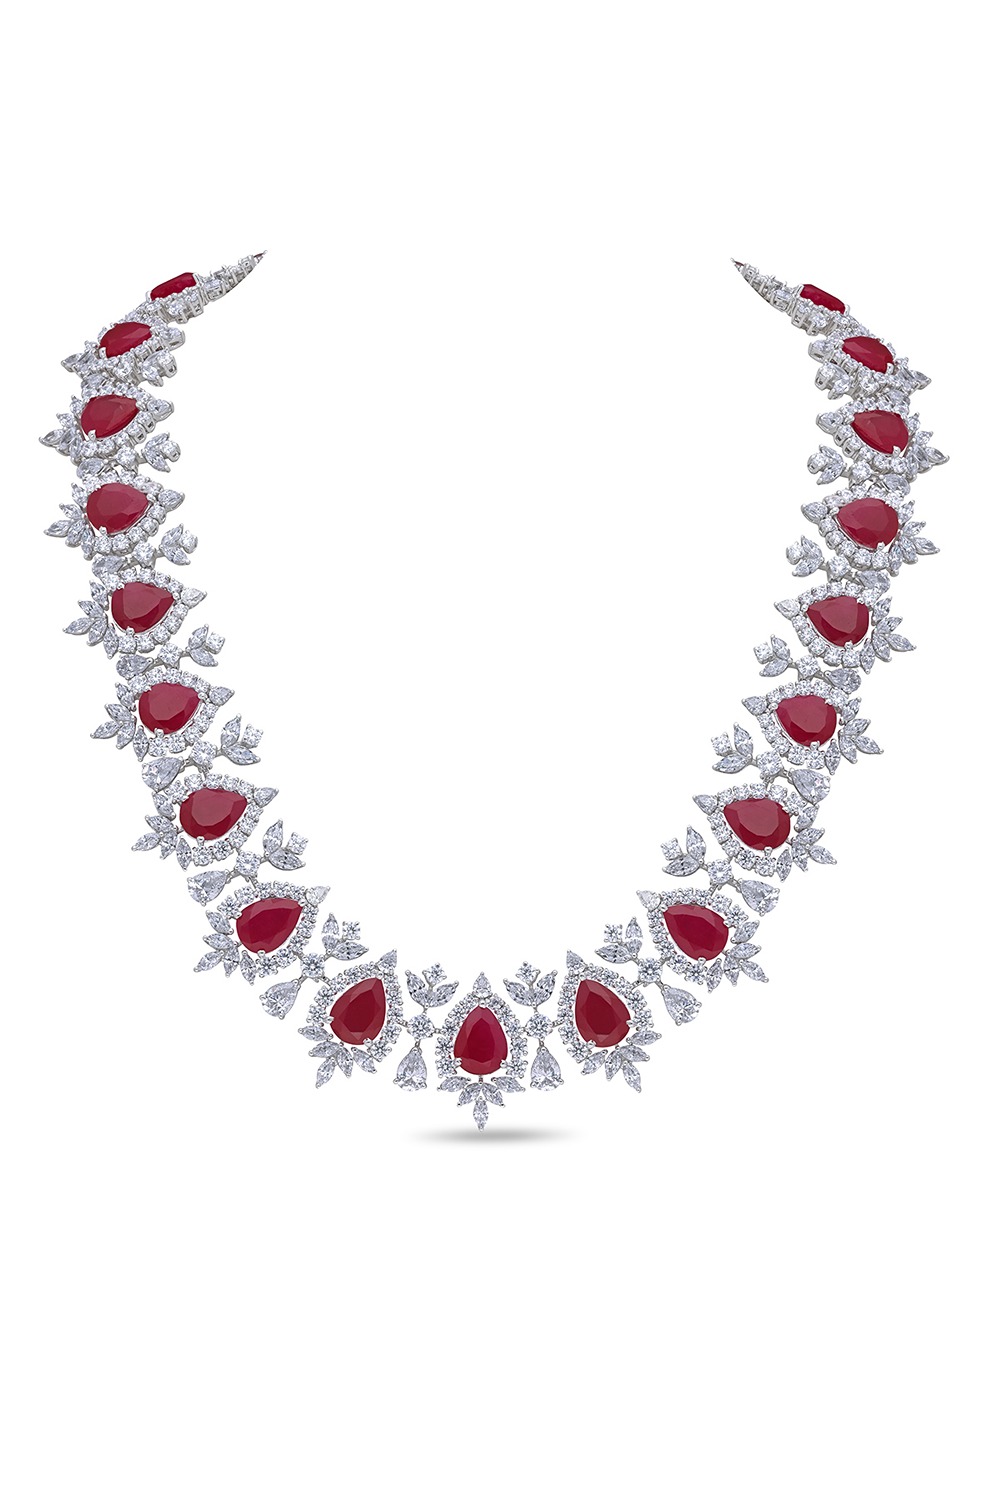 Red Bridal Necklace